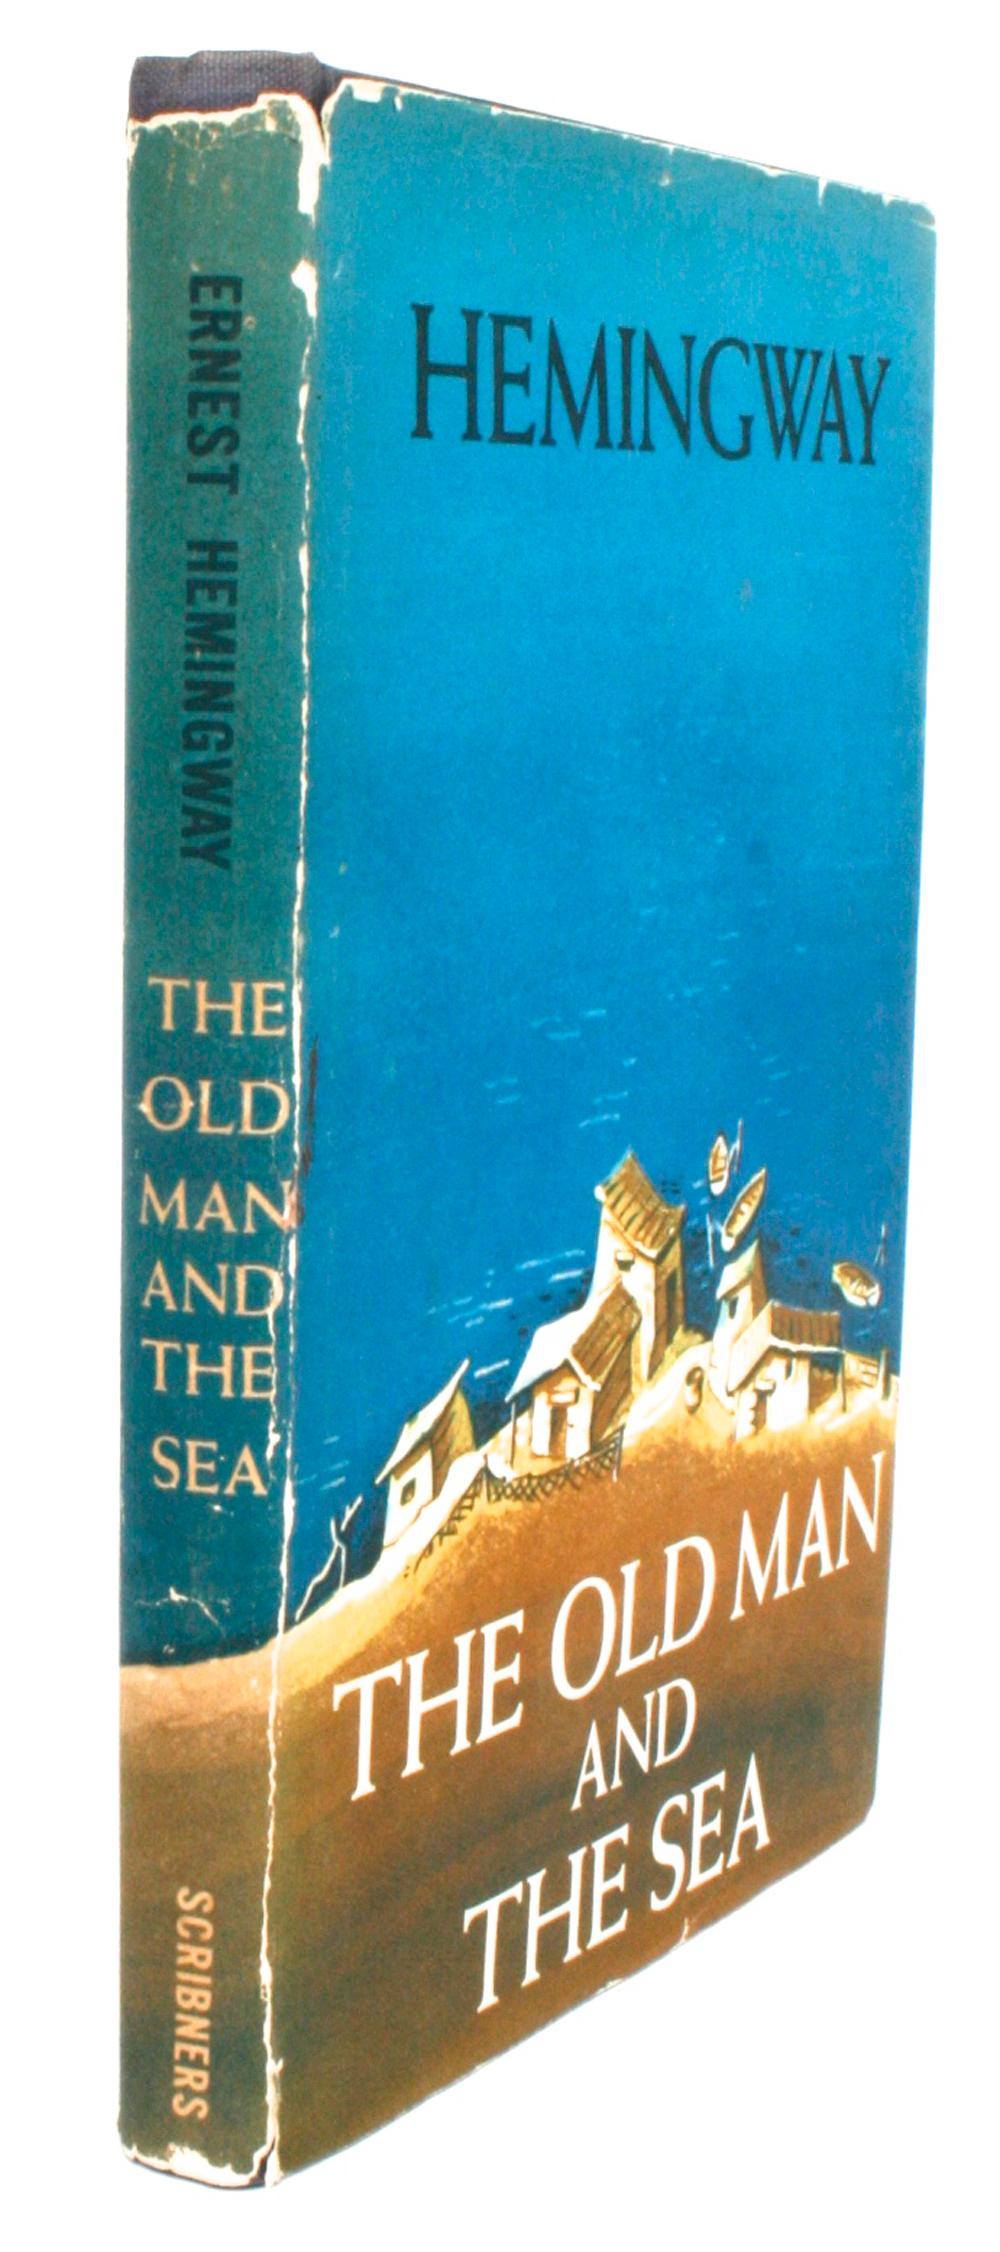 Paper The Old Man and the Sea by Ernest Hemingway